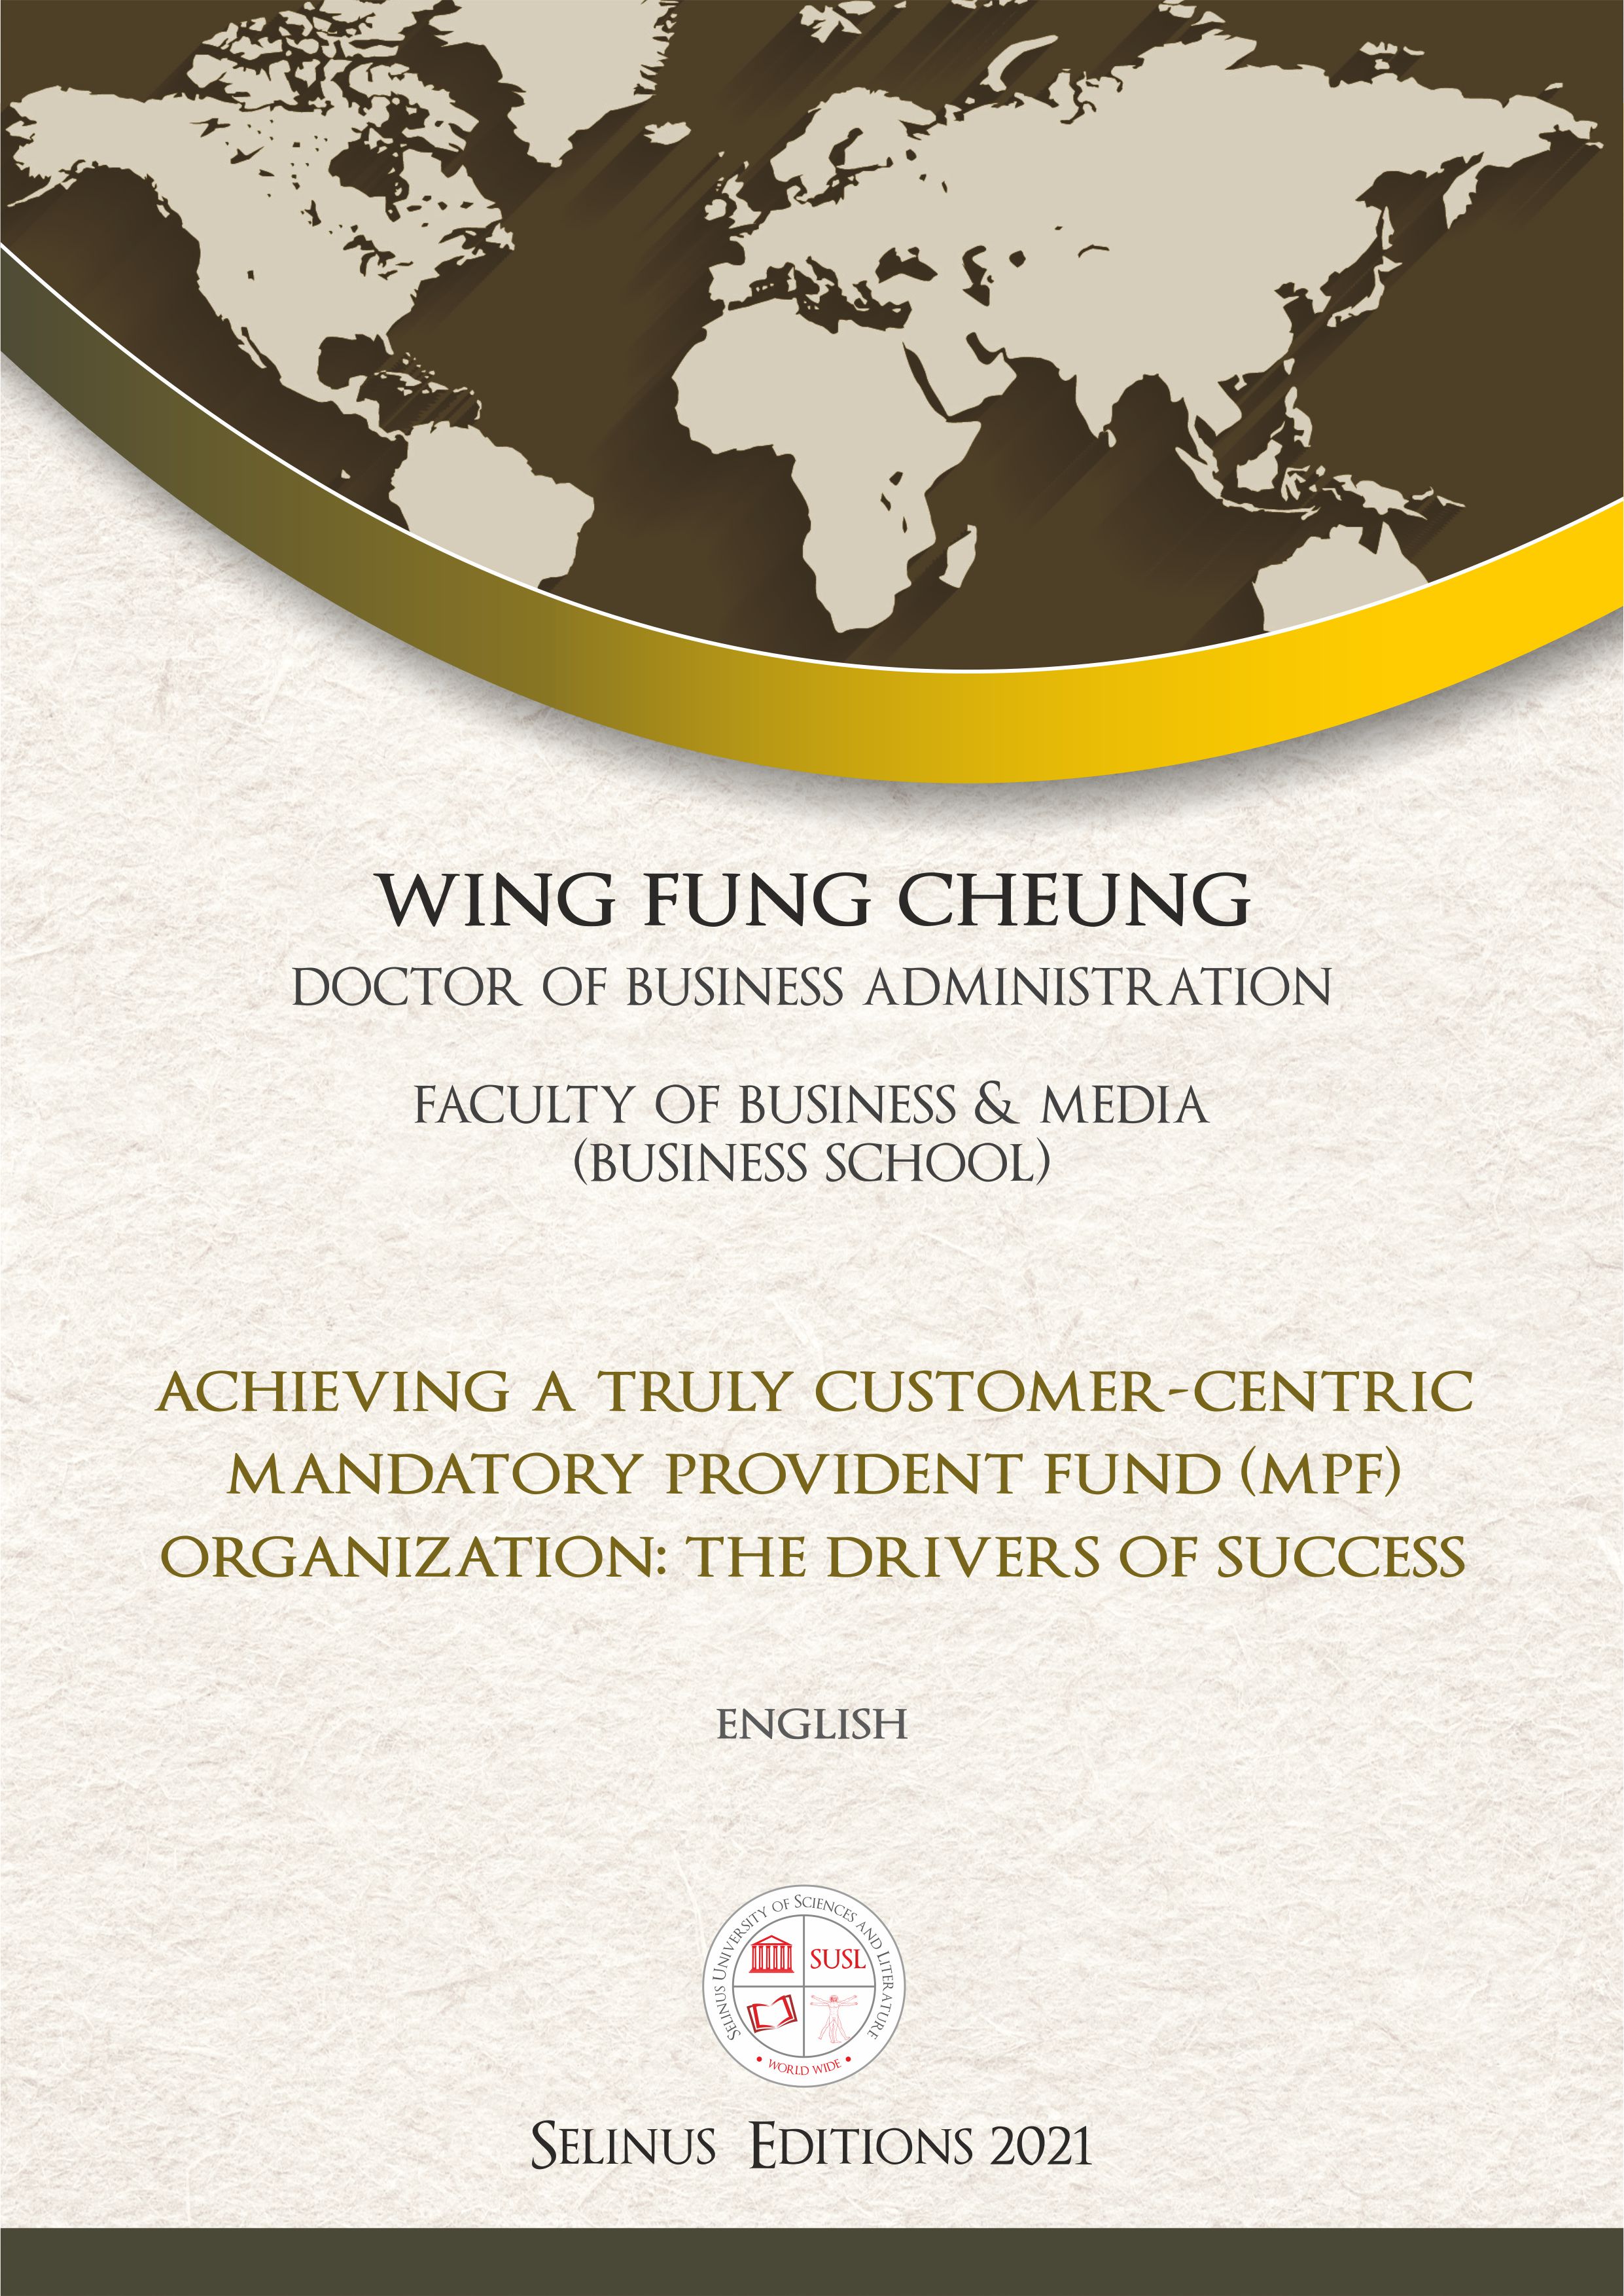 Thesis Wing Fung Cheung